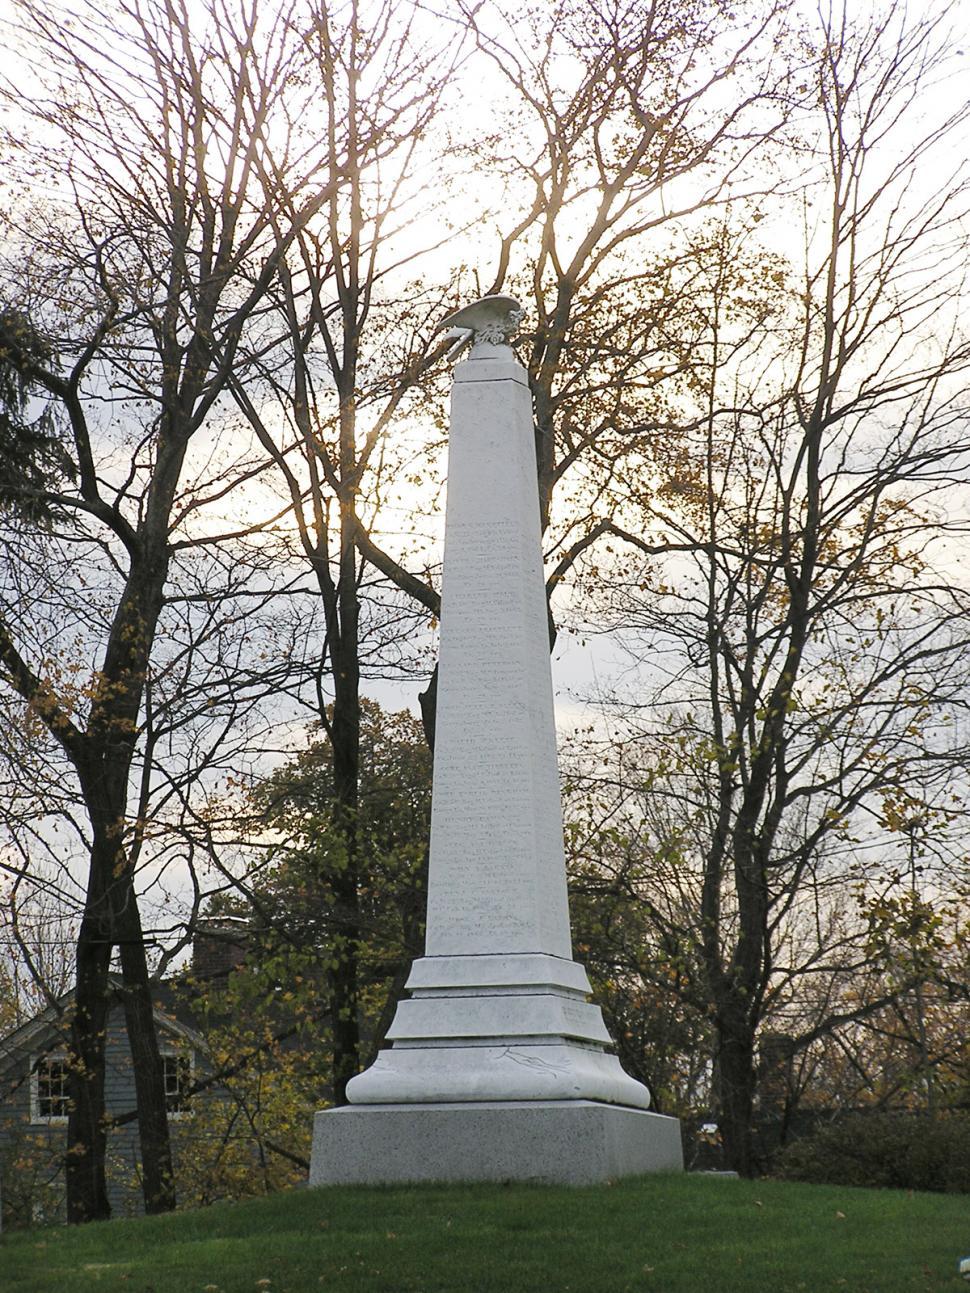 Free Image of Monument at Sunset 